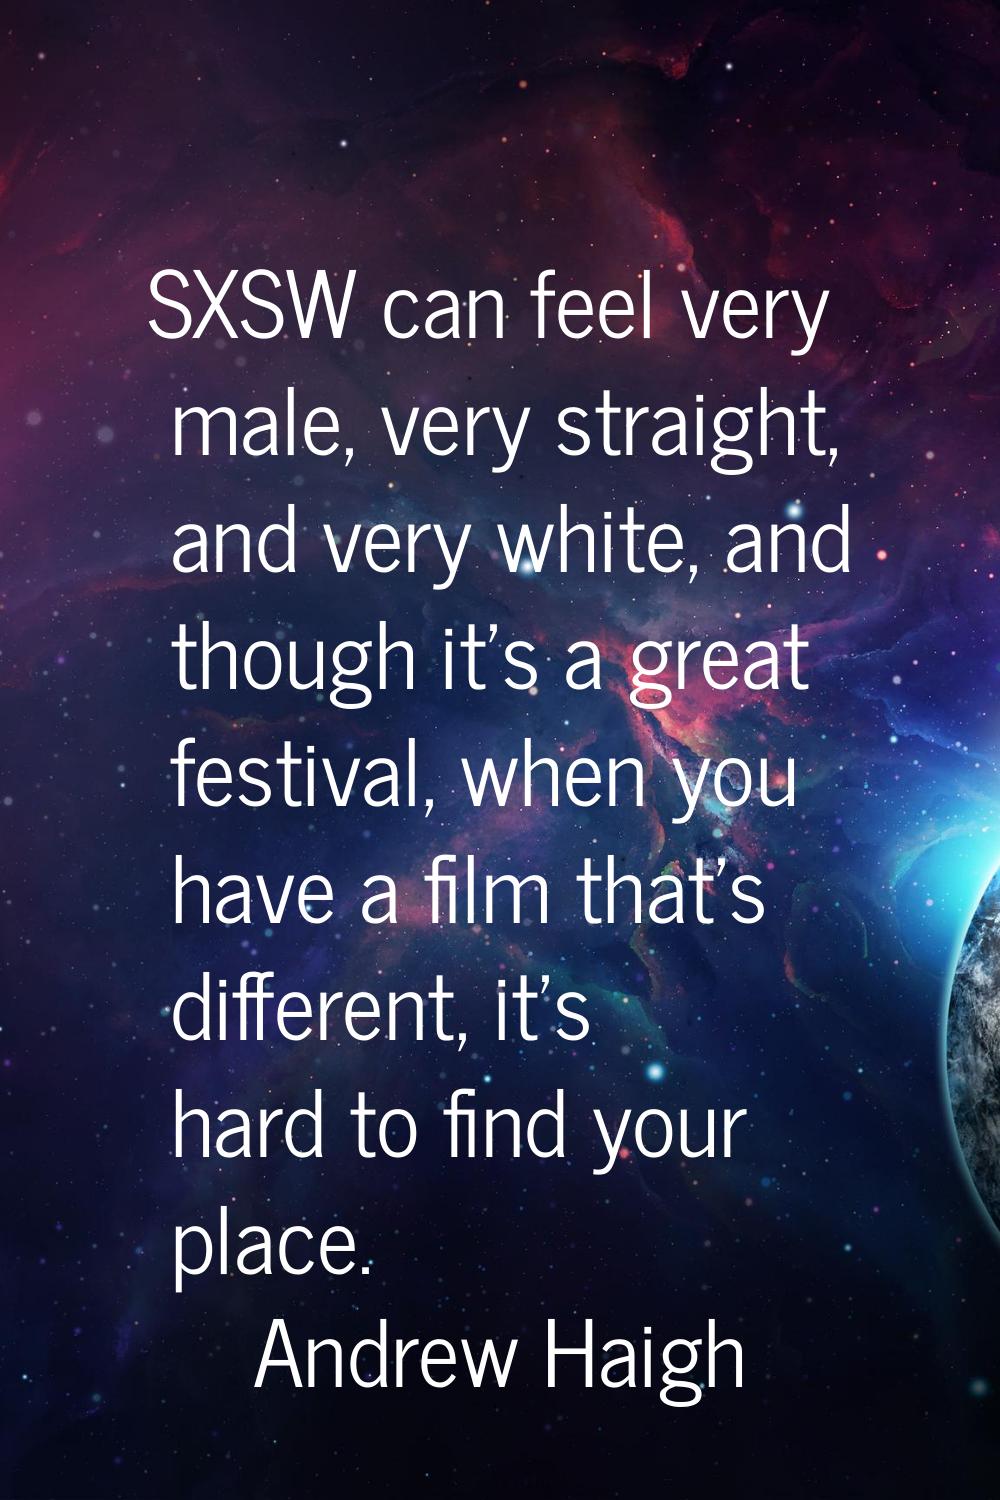 SXSW can feel very male, very straight, and very white, and though it's a great festival, when you 